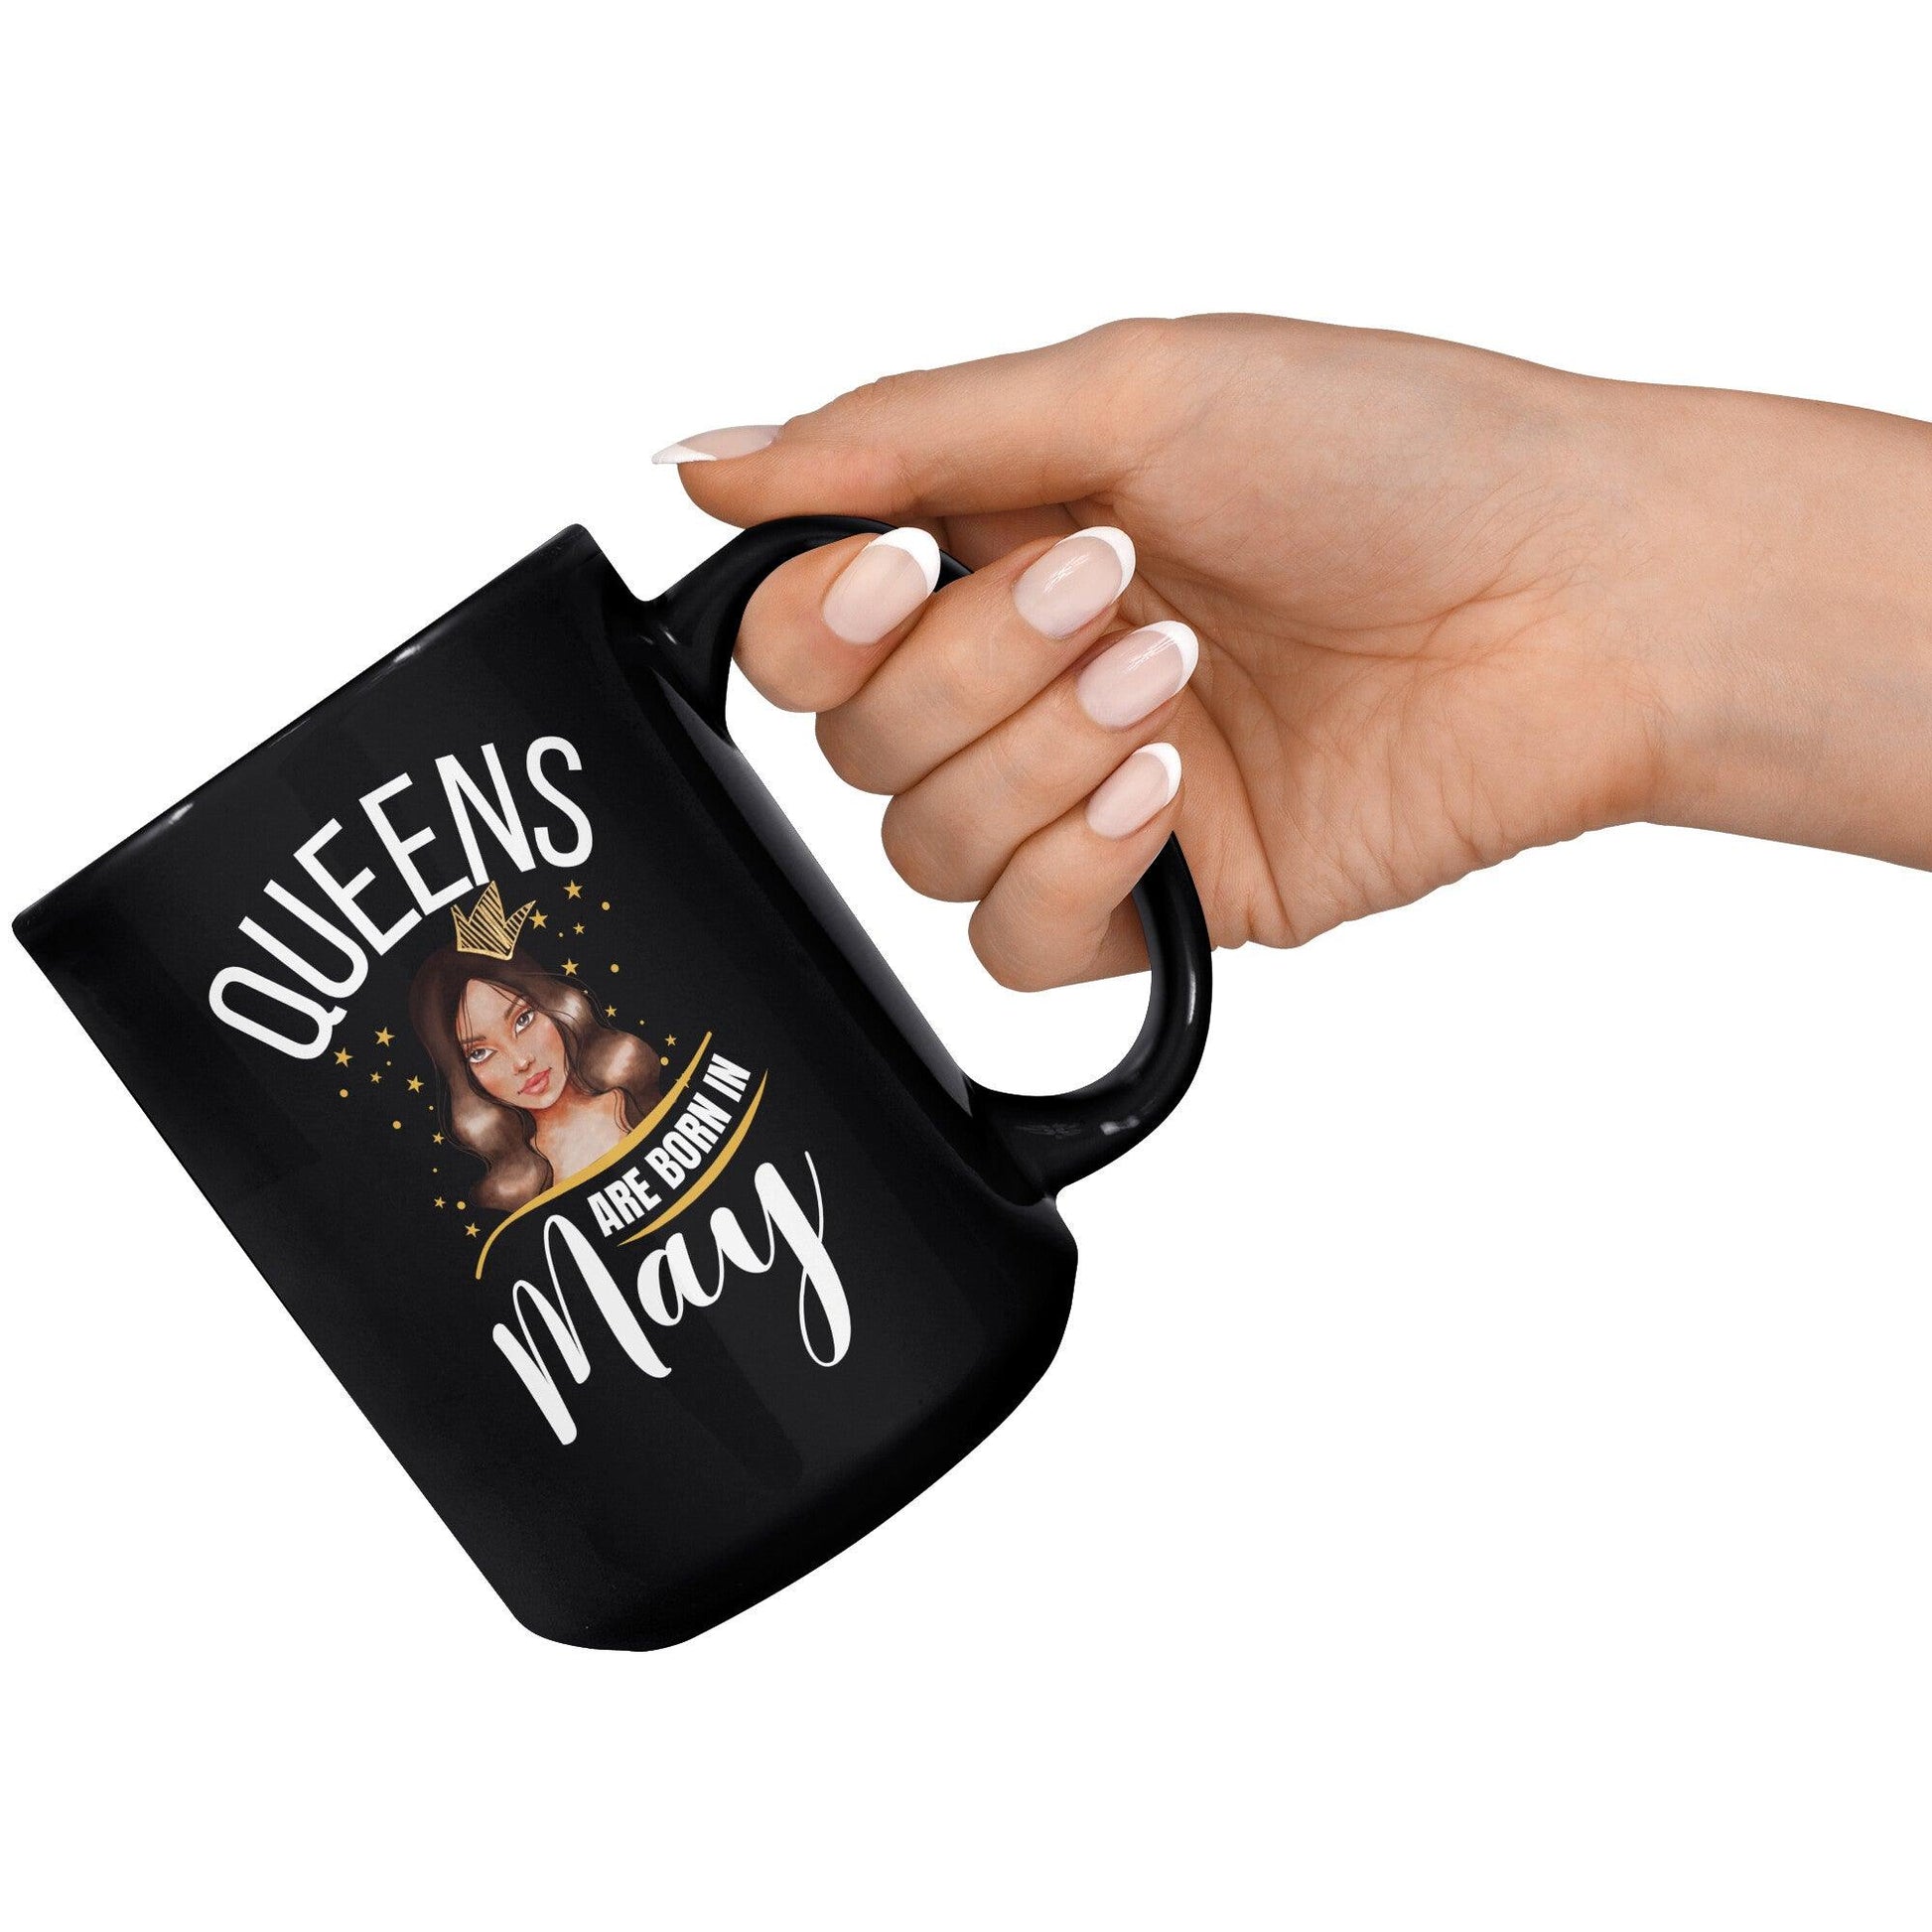 Queens Are Born In May Lady Black Mug - TheGivenGet